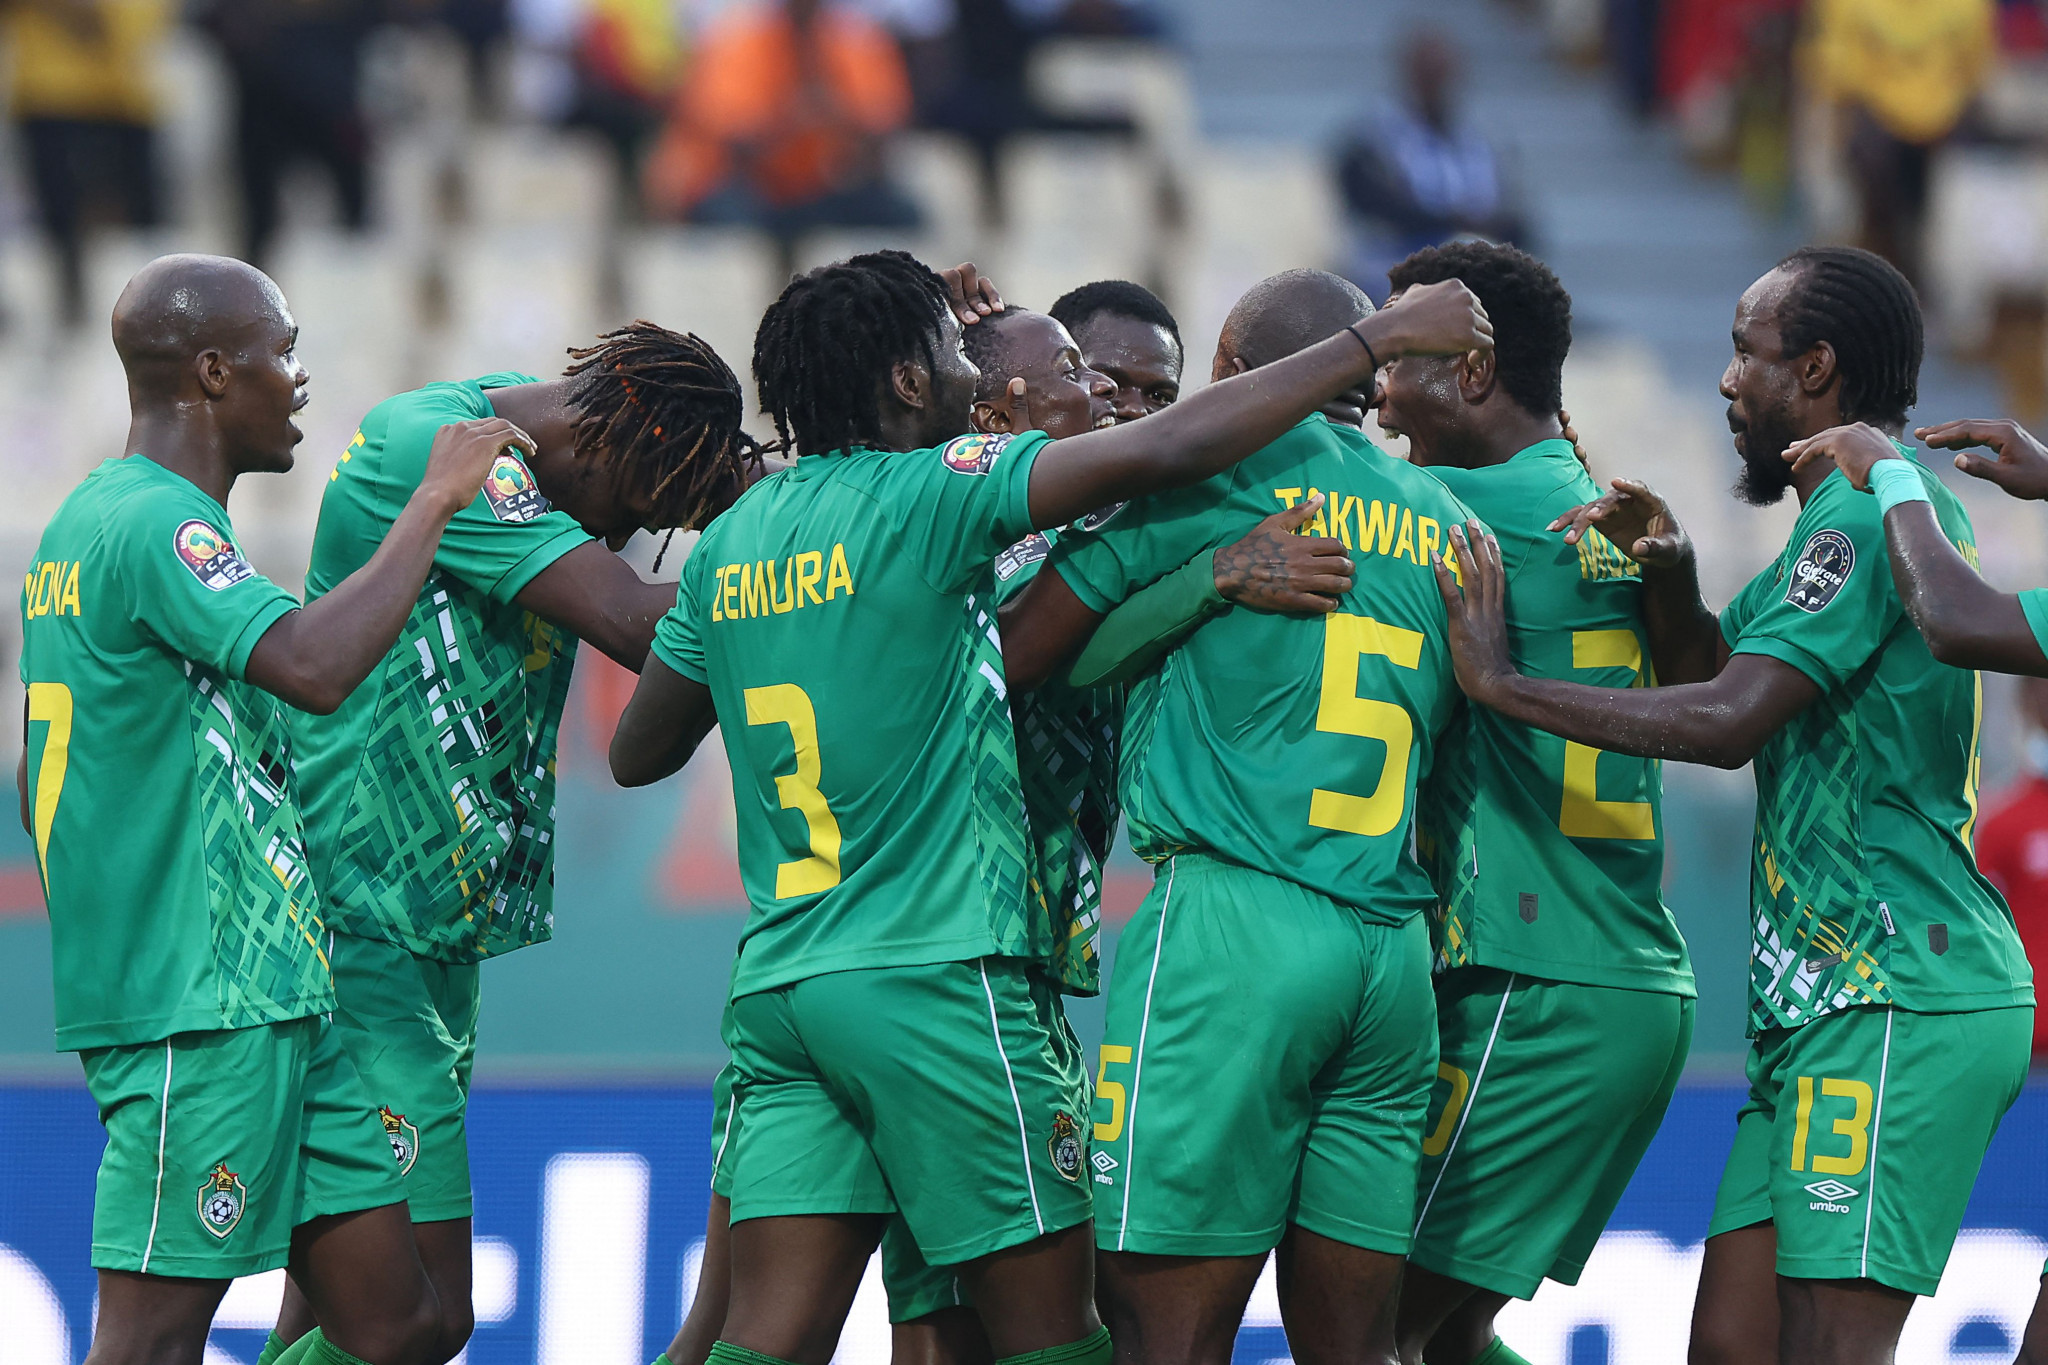 Zimbabwe have played at the last three editions of the Africa Cup of Nations, but the country's National Federation is currently suspended by FIFA ©Getty Images